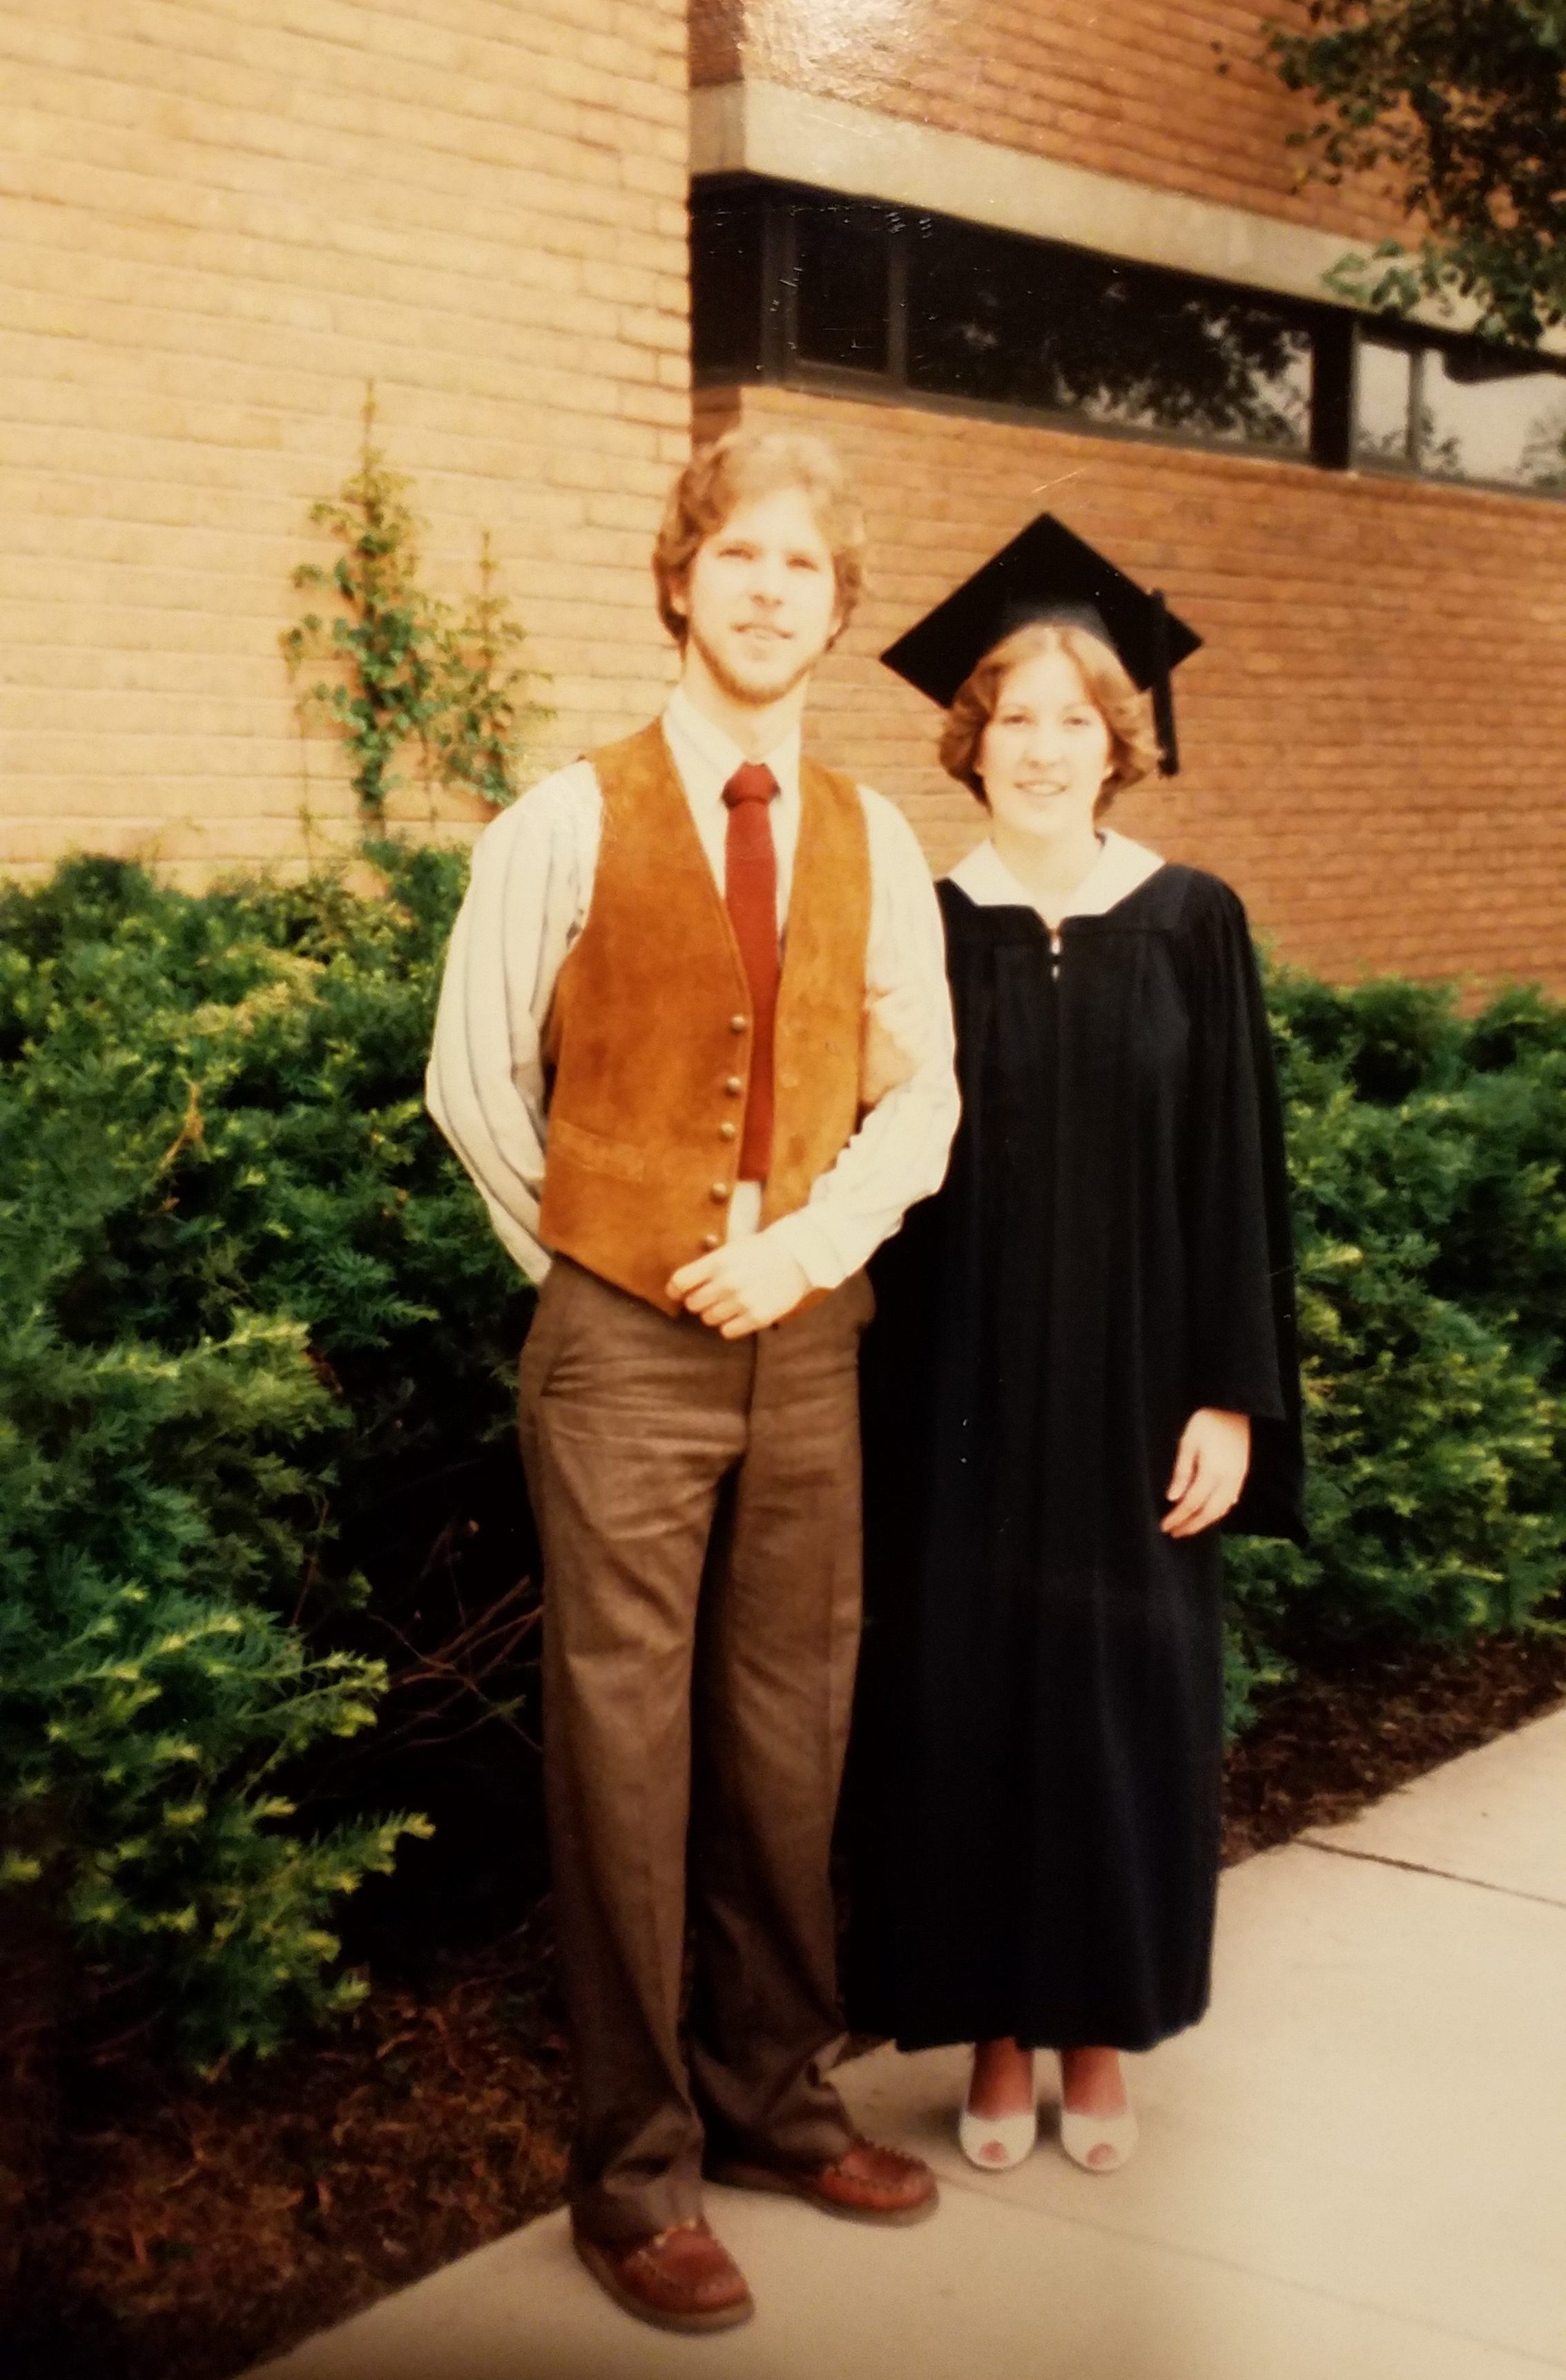 Kim with her brother on graduation day 1982. Photo courtesy of the Stadtler family.